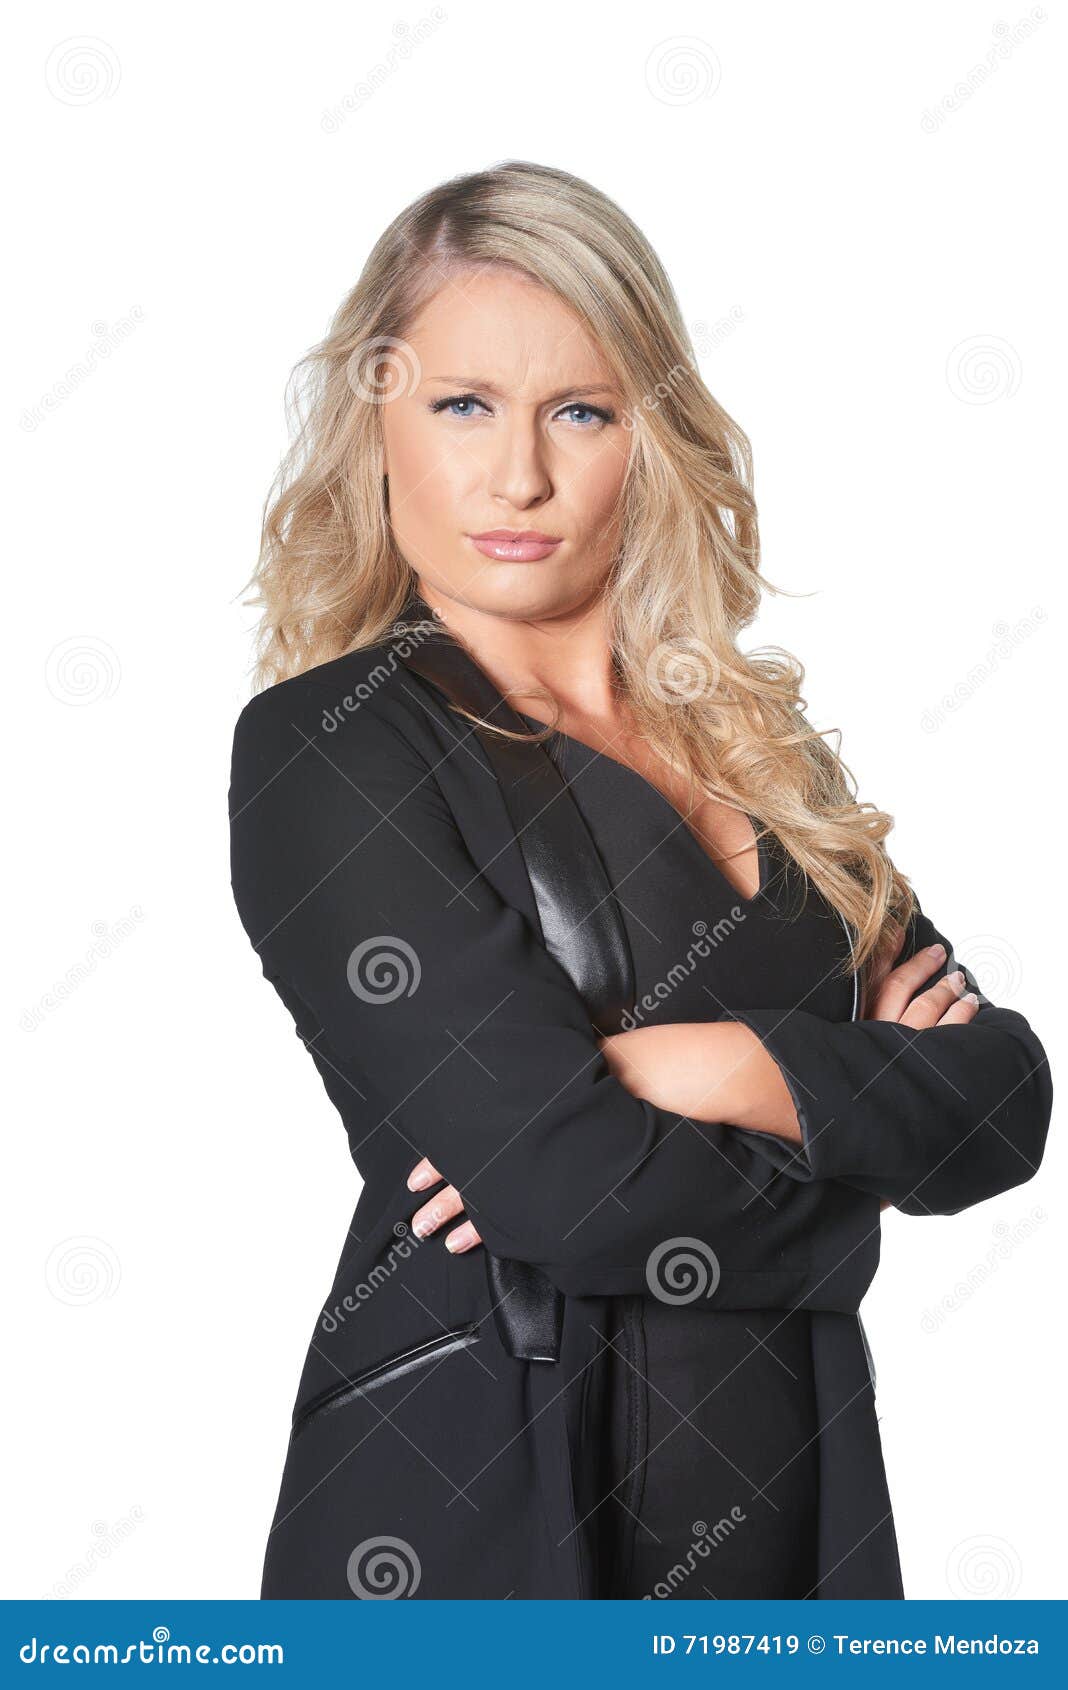 beautiful blond busines woman giving disapproving look, 